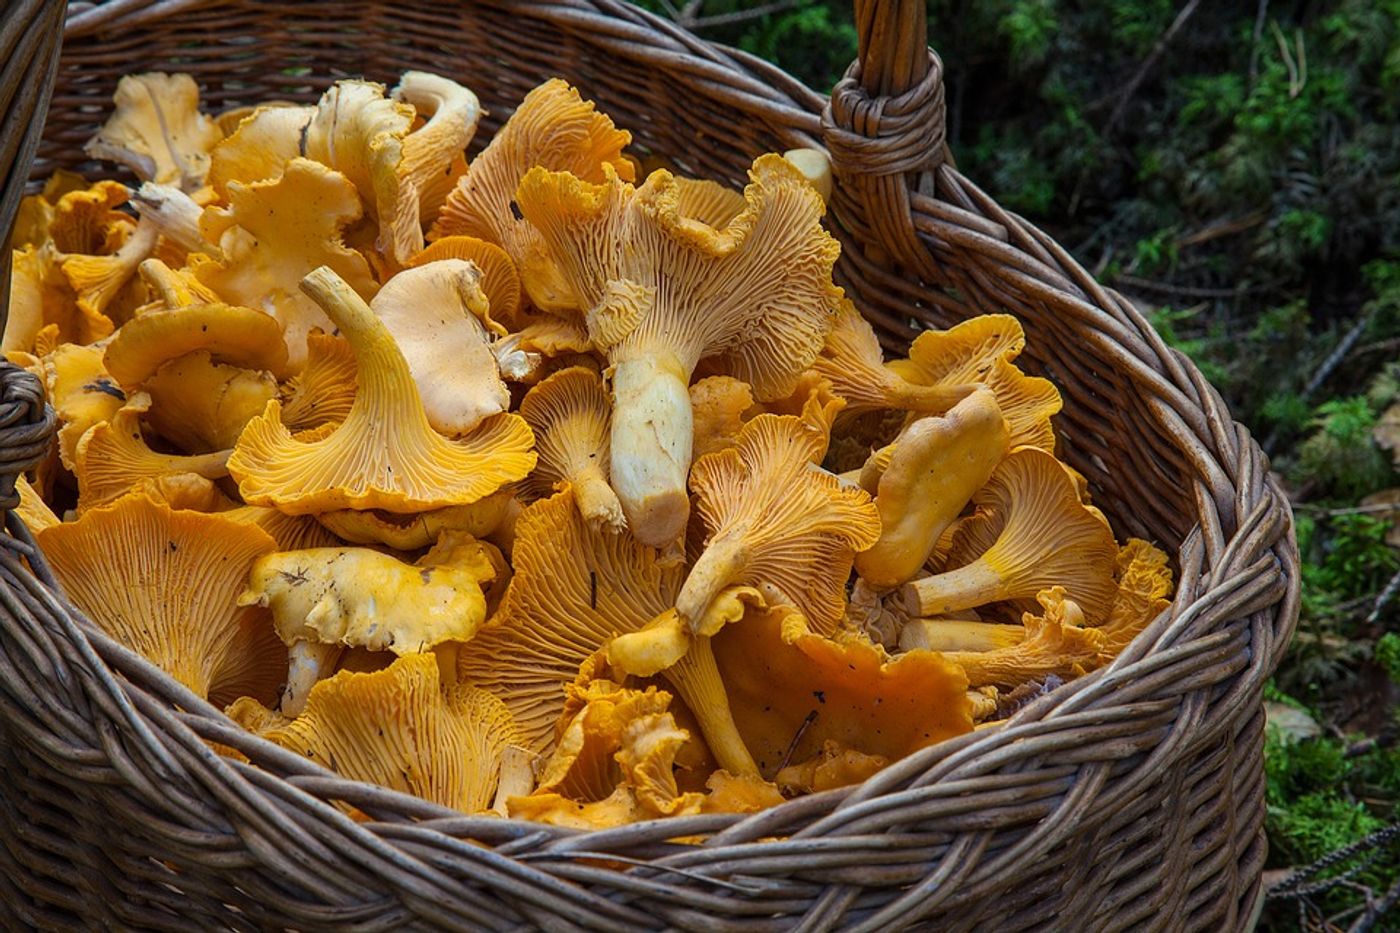 Can eating mushrooms reduce the risk of prostate cancer? Photo: Pixabay